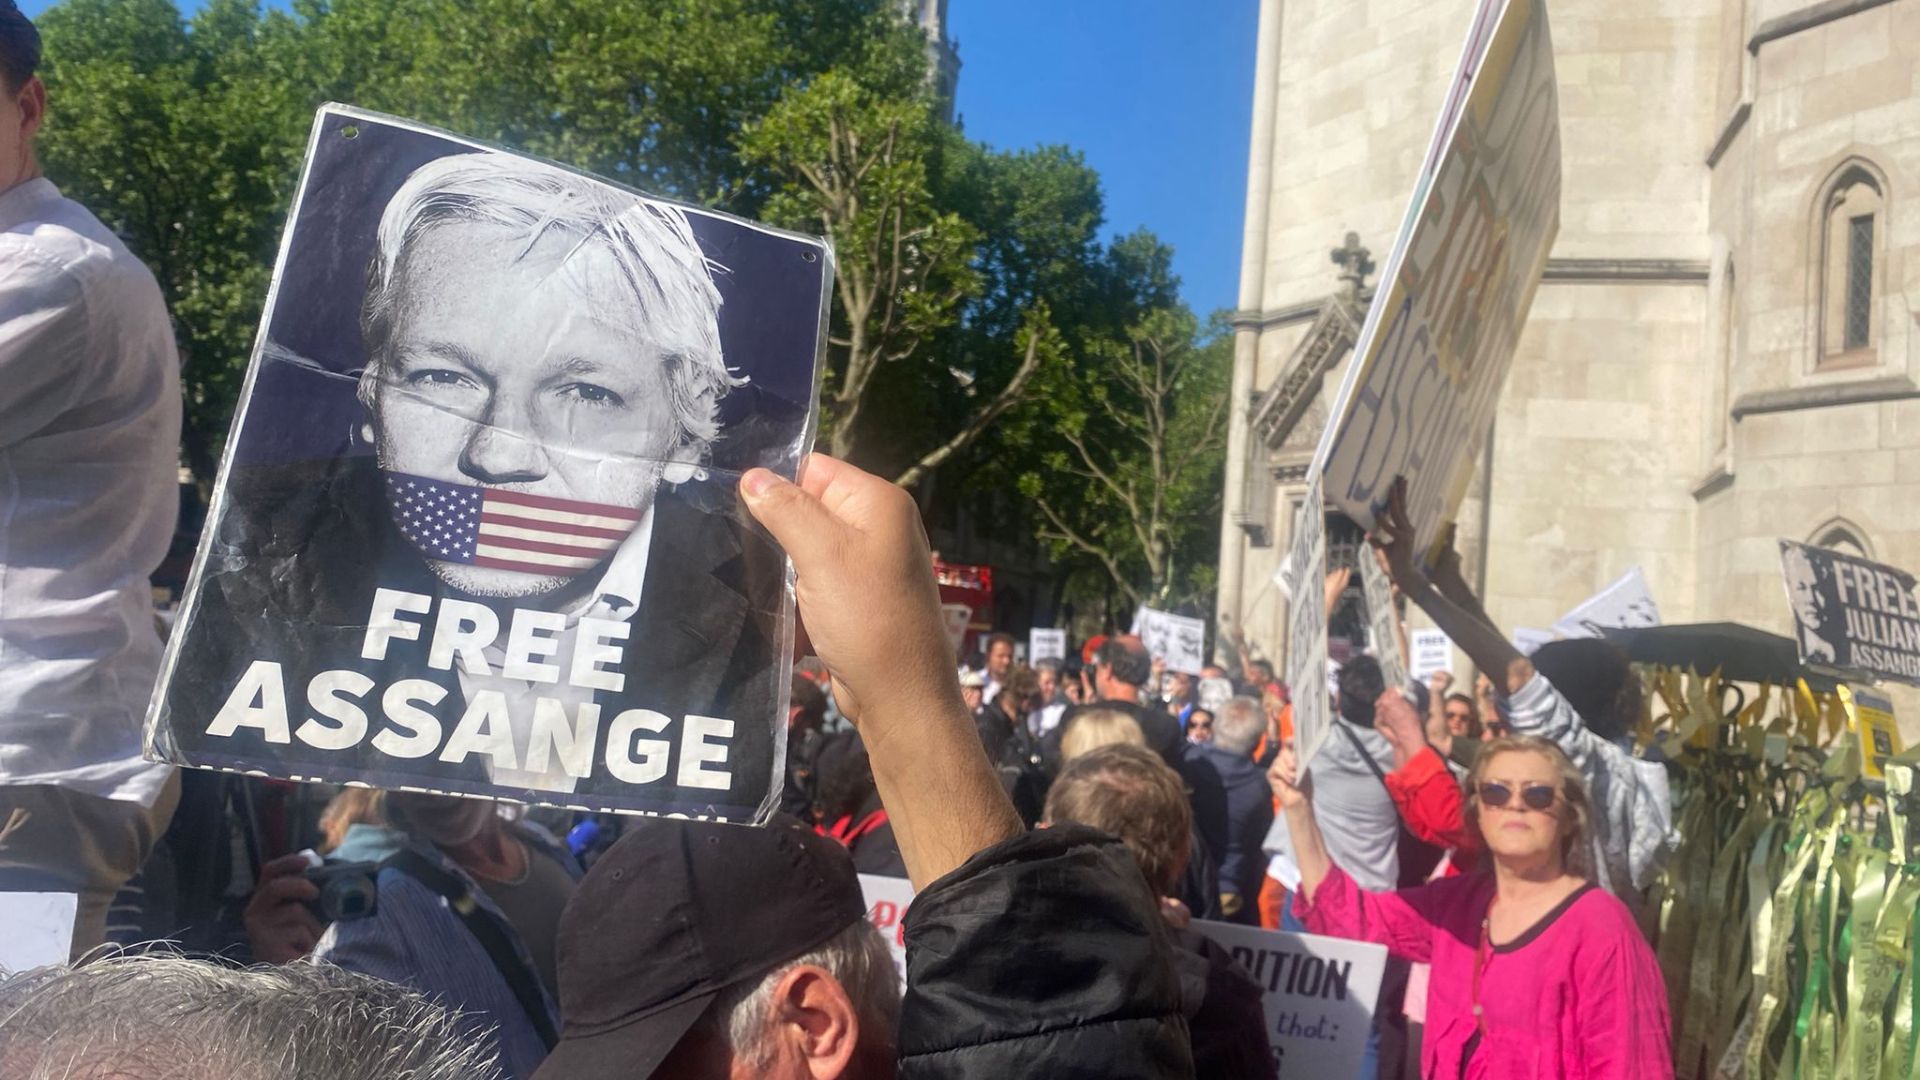 Assange supporters packed the area outside the court. /AJ Wood/CGTN